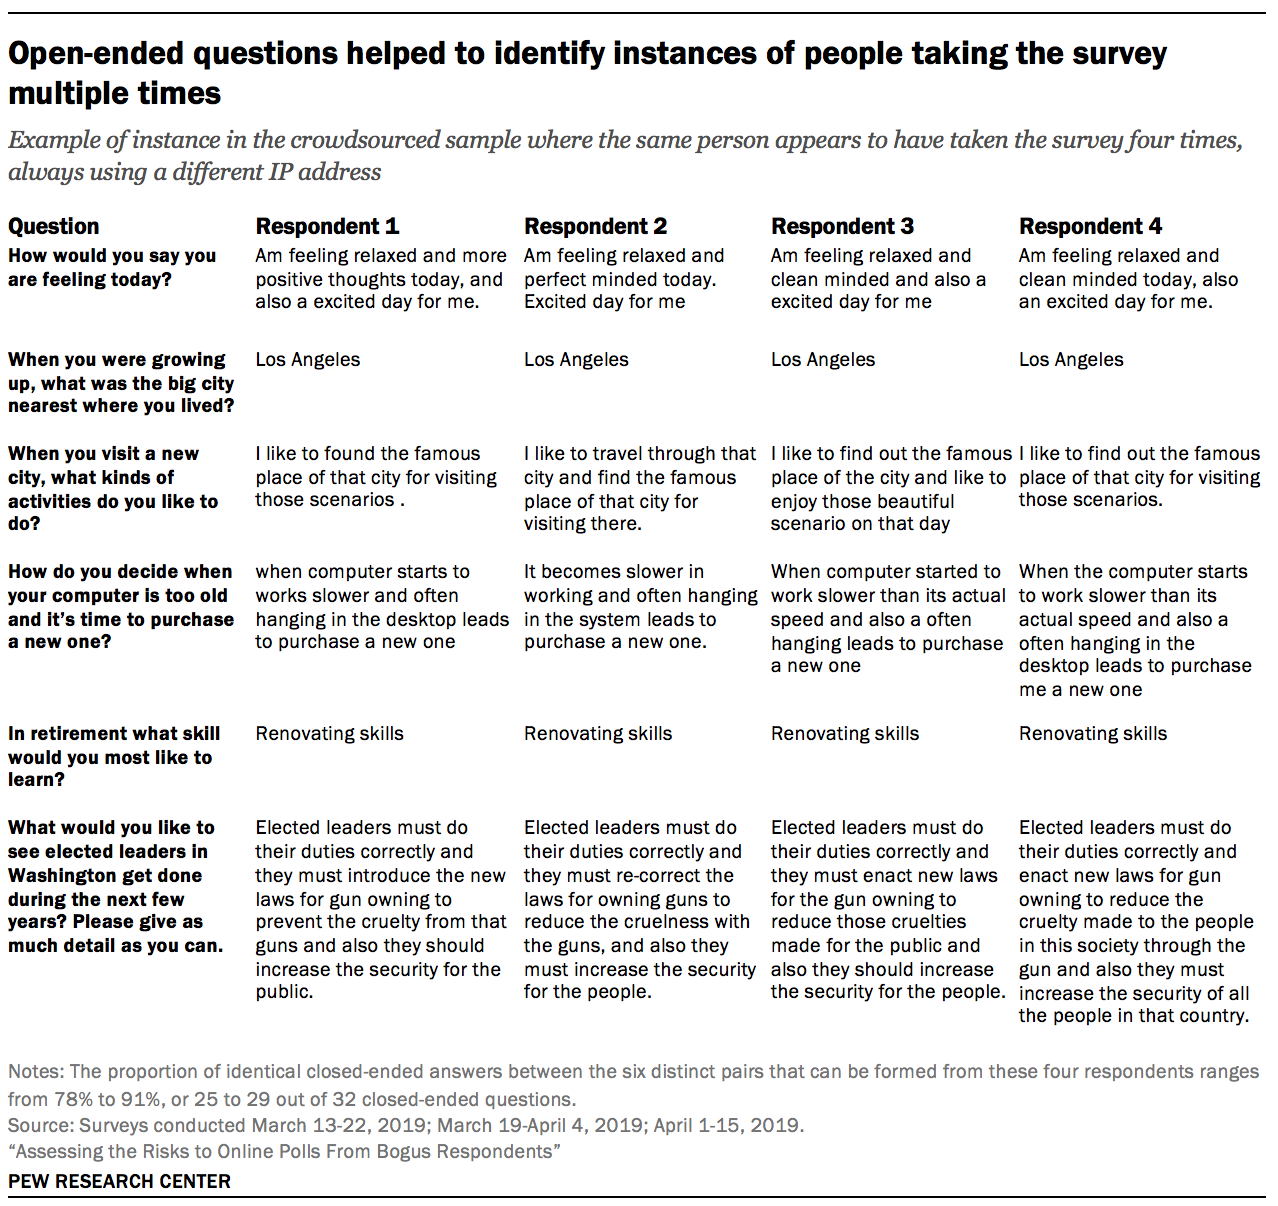 Open-ended questions helped to identify instances of people taking the survey multiple times